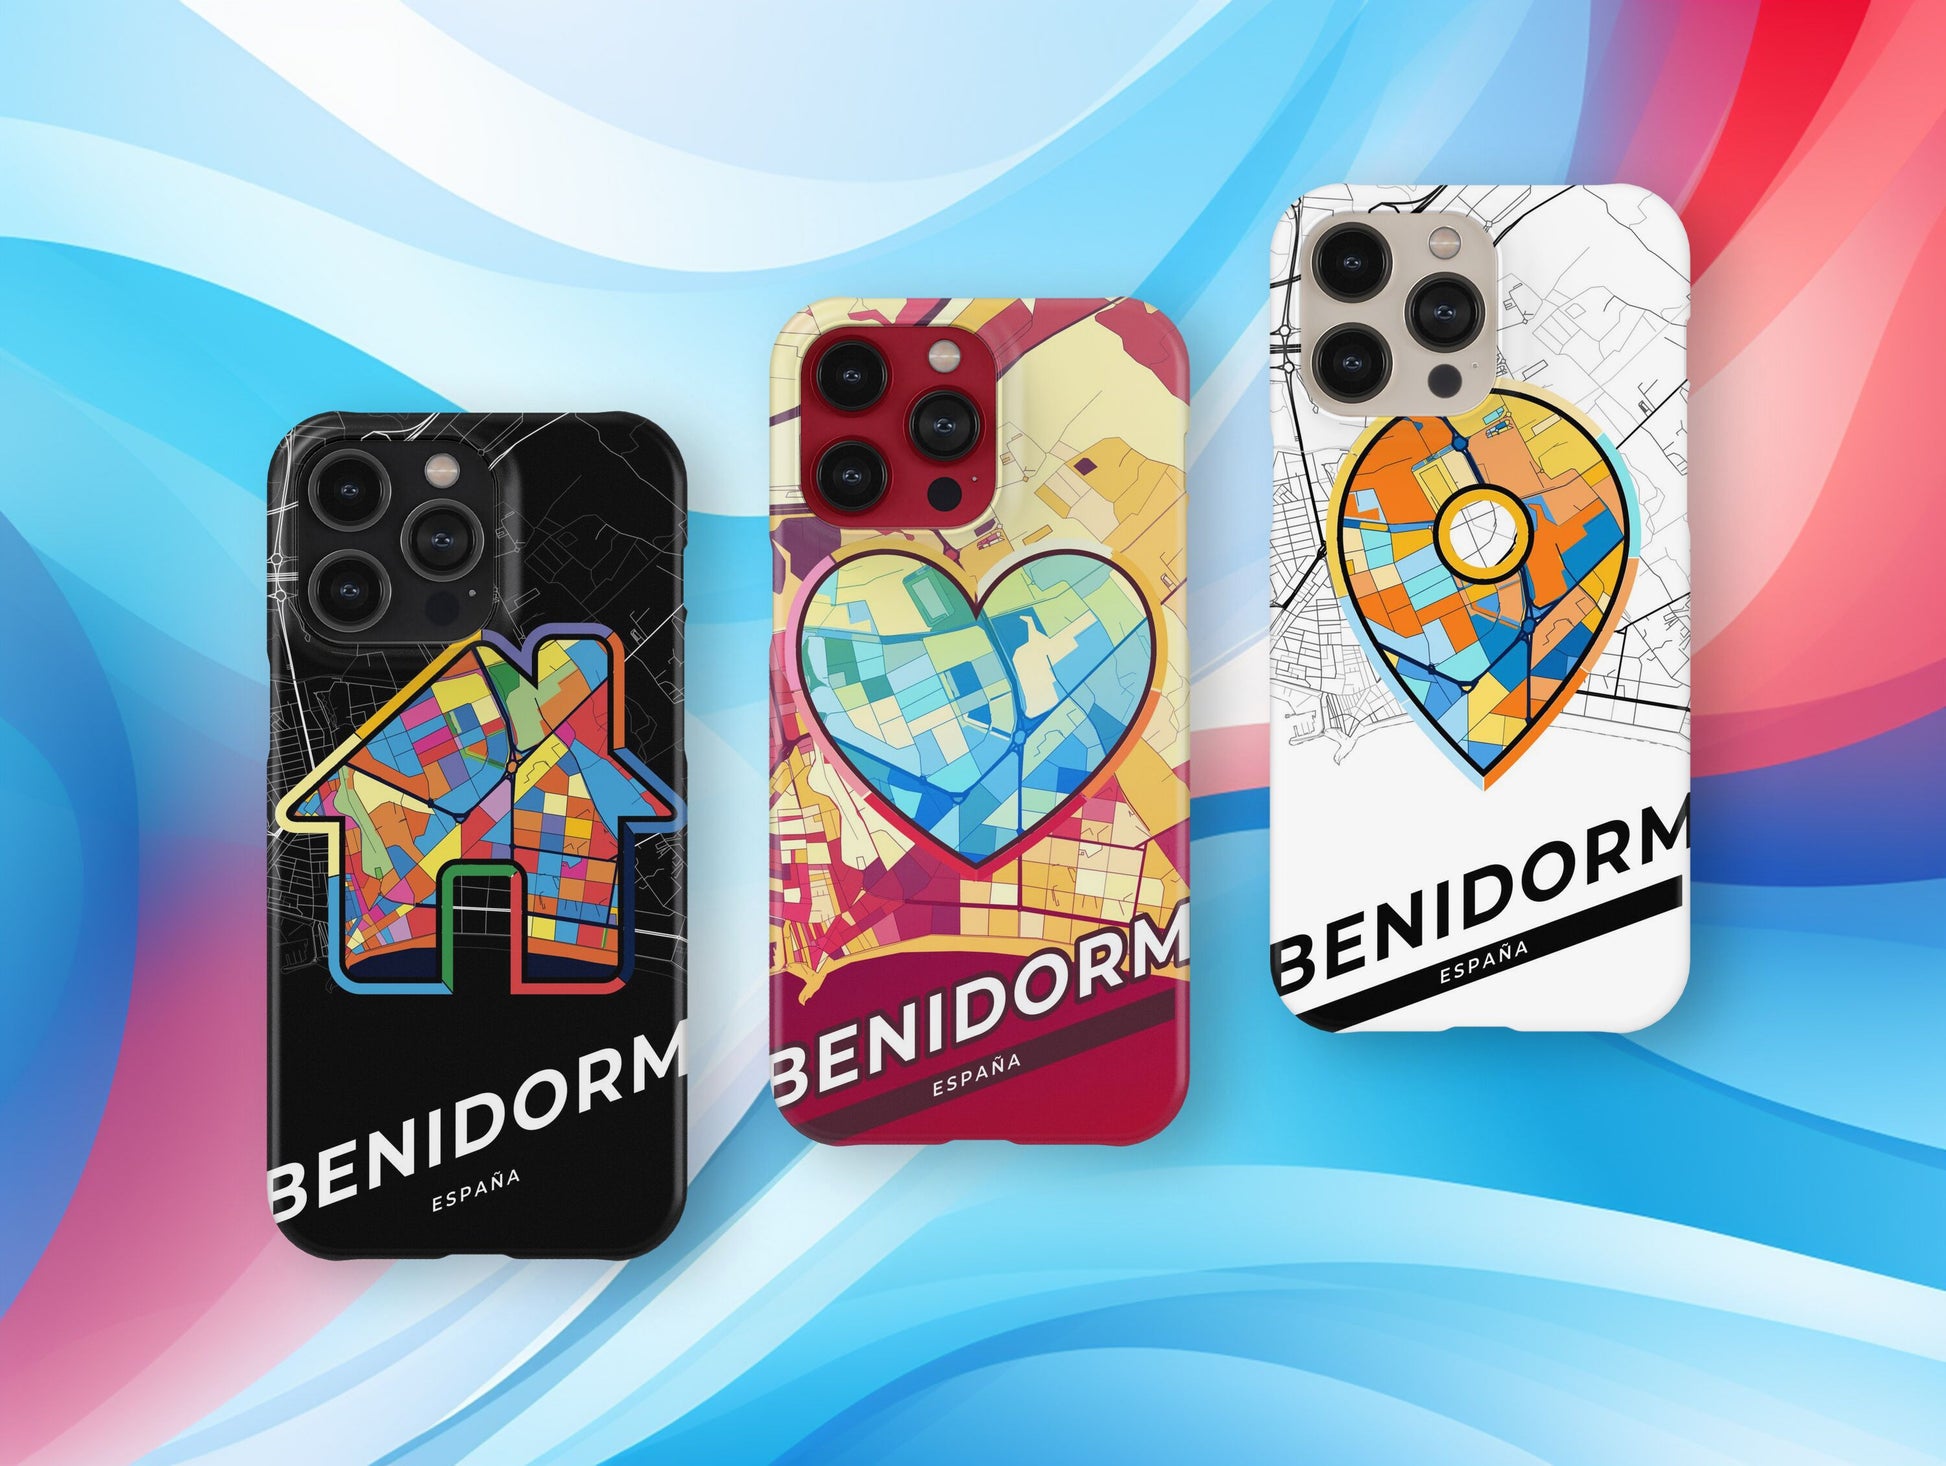 Benidorm Spain slim phone case with colorful icon. Birthday, wedding or housewarming gift. Couple match cases.